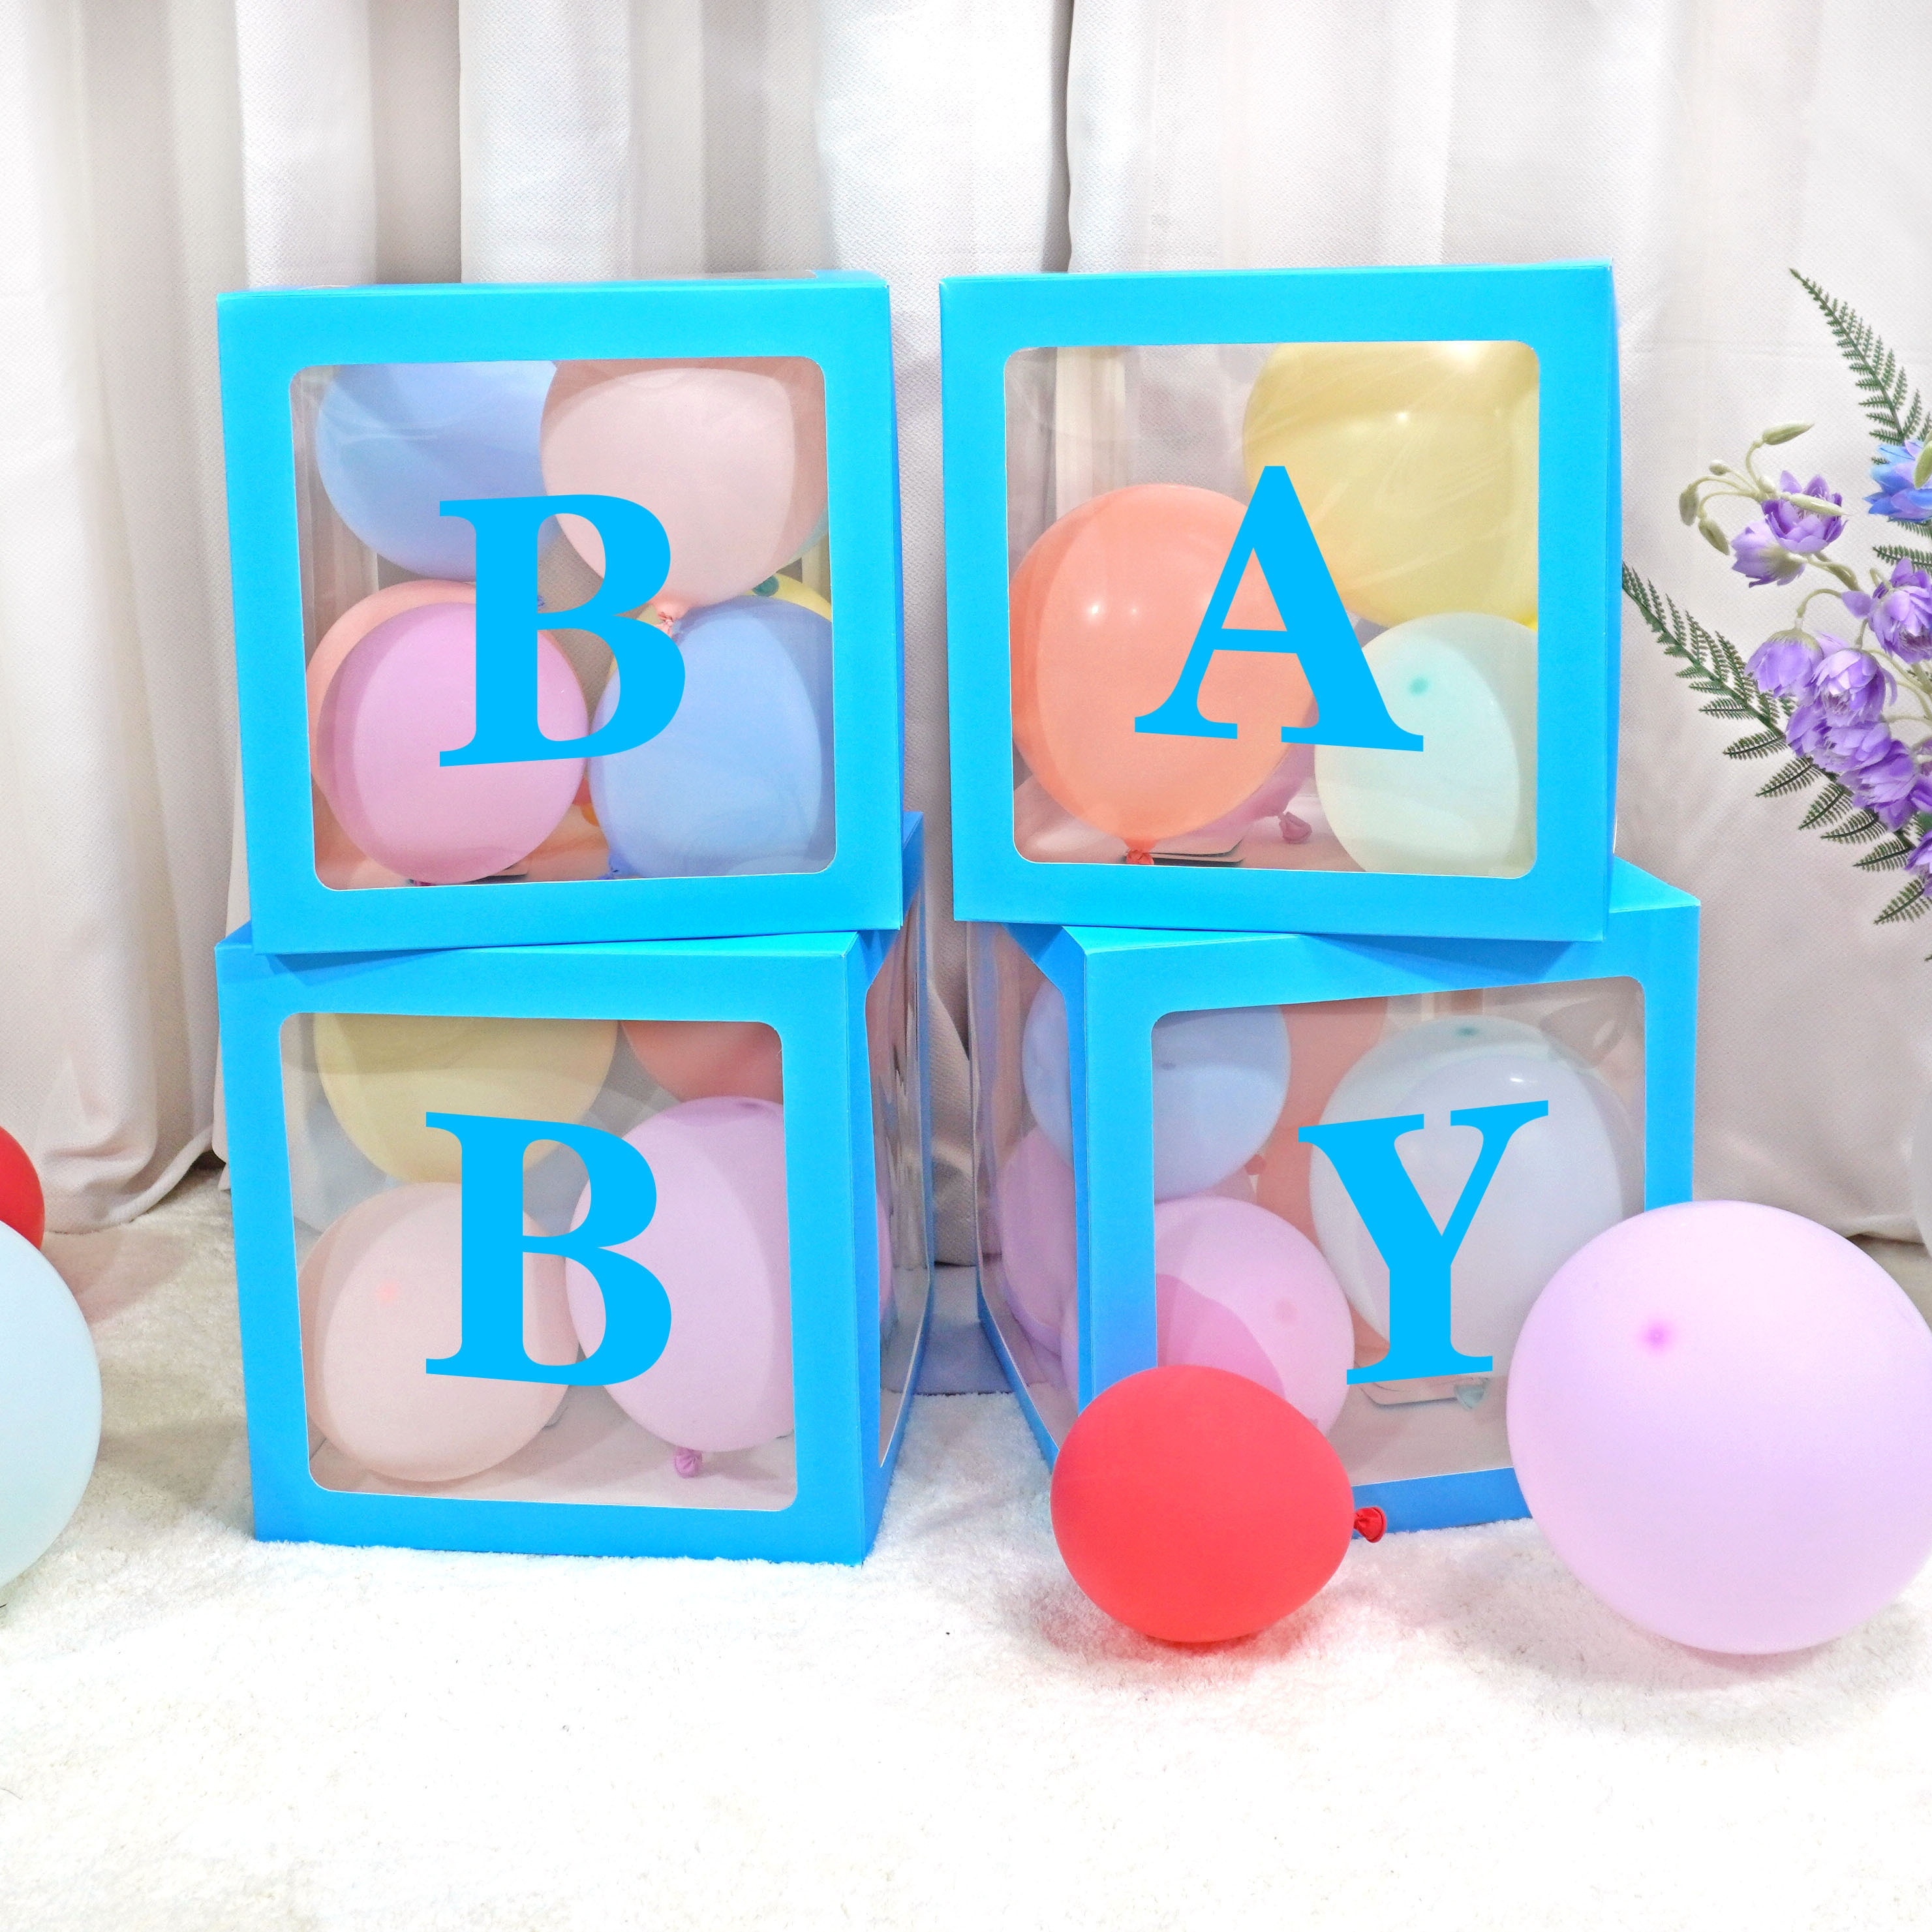  First Birthday Balloon Boxes for Party Decorations,1st Birthday  Balloon Blocks Decorations with ONE Letter for Boy Girl Baby Shower,Photo  Shoot Prop,Table Centerpiece : Toys & Games